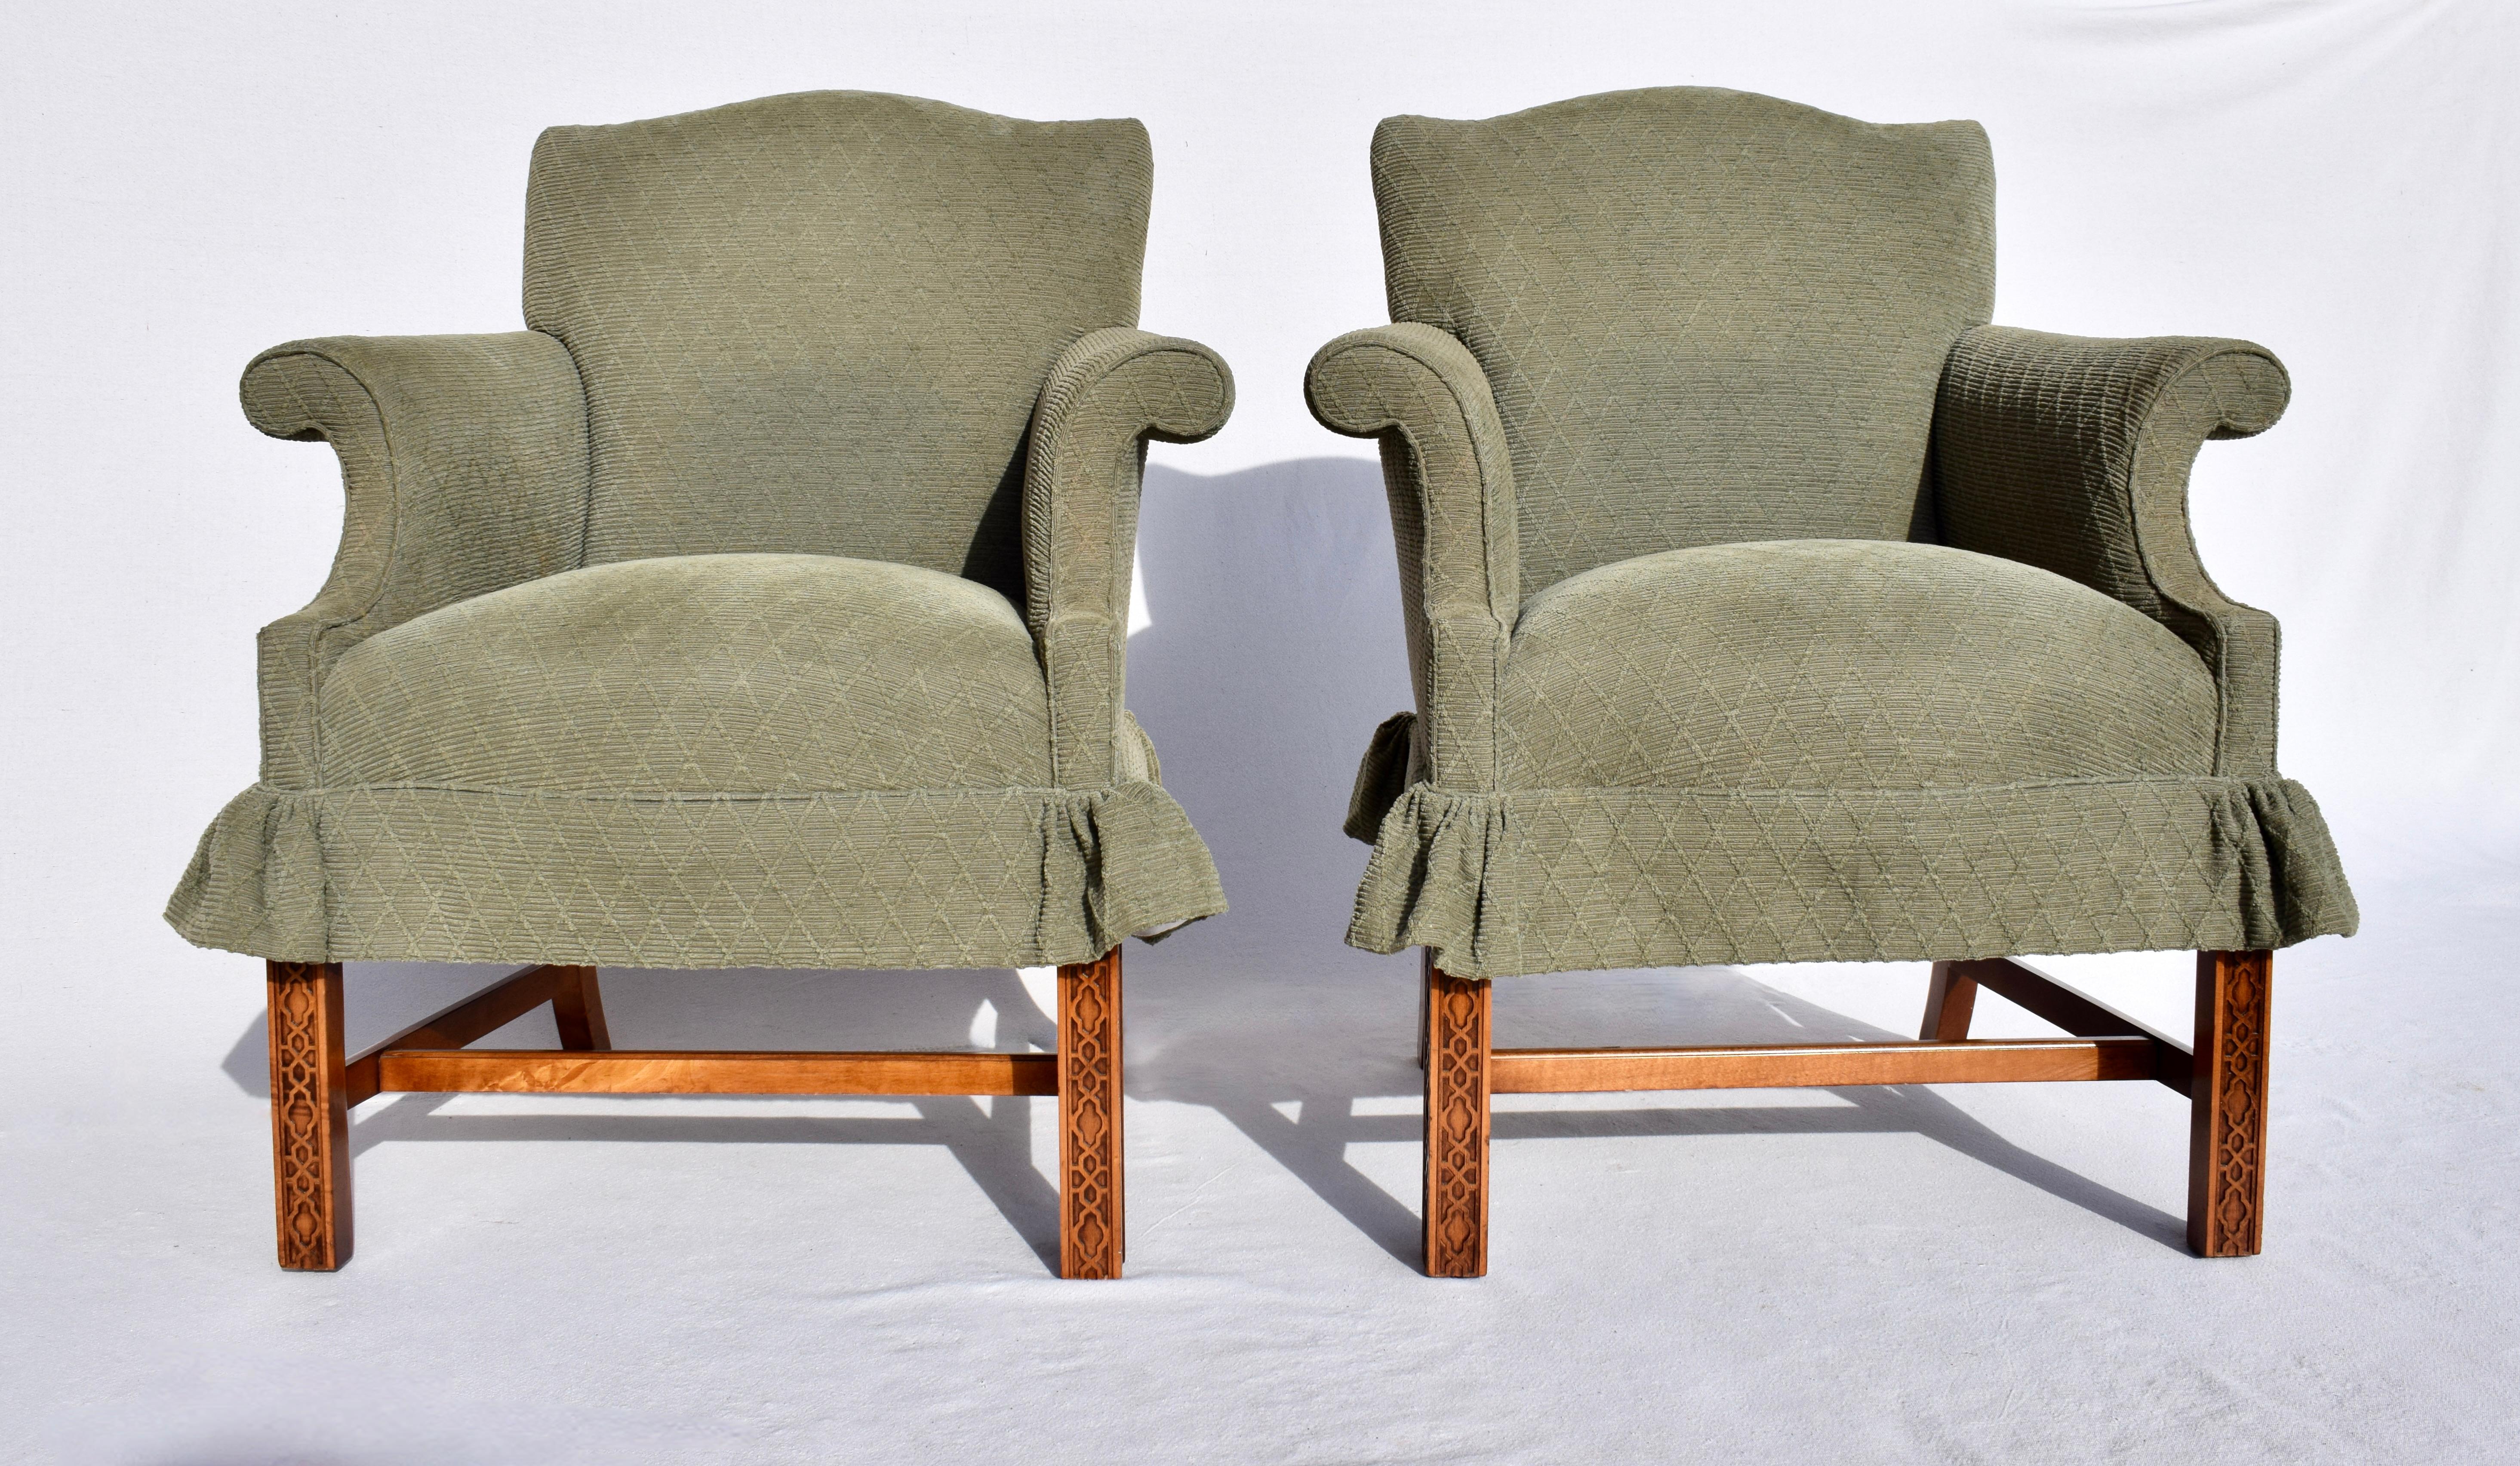 A pair of very sweet George III Chippendale style armchairs in Sage green textured diamonds Chenille upholstery with Chinese Chippendale fretwork to the Mahogany bases with H stretchers. Cradling comfort; heirloom quality.  Cozy silhouettes inside